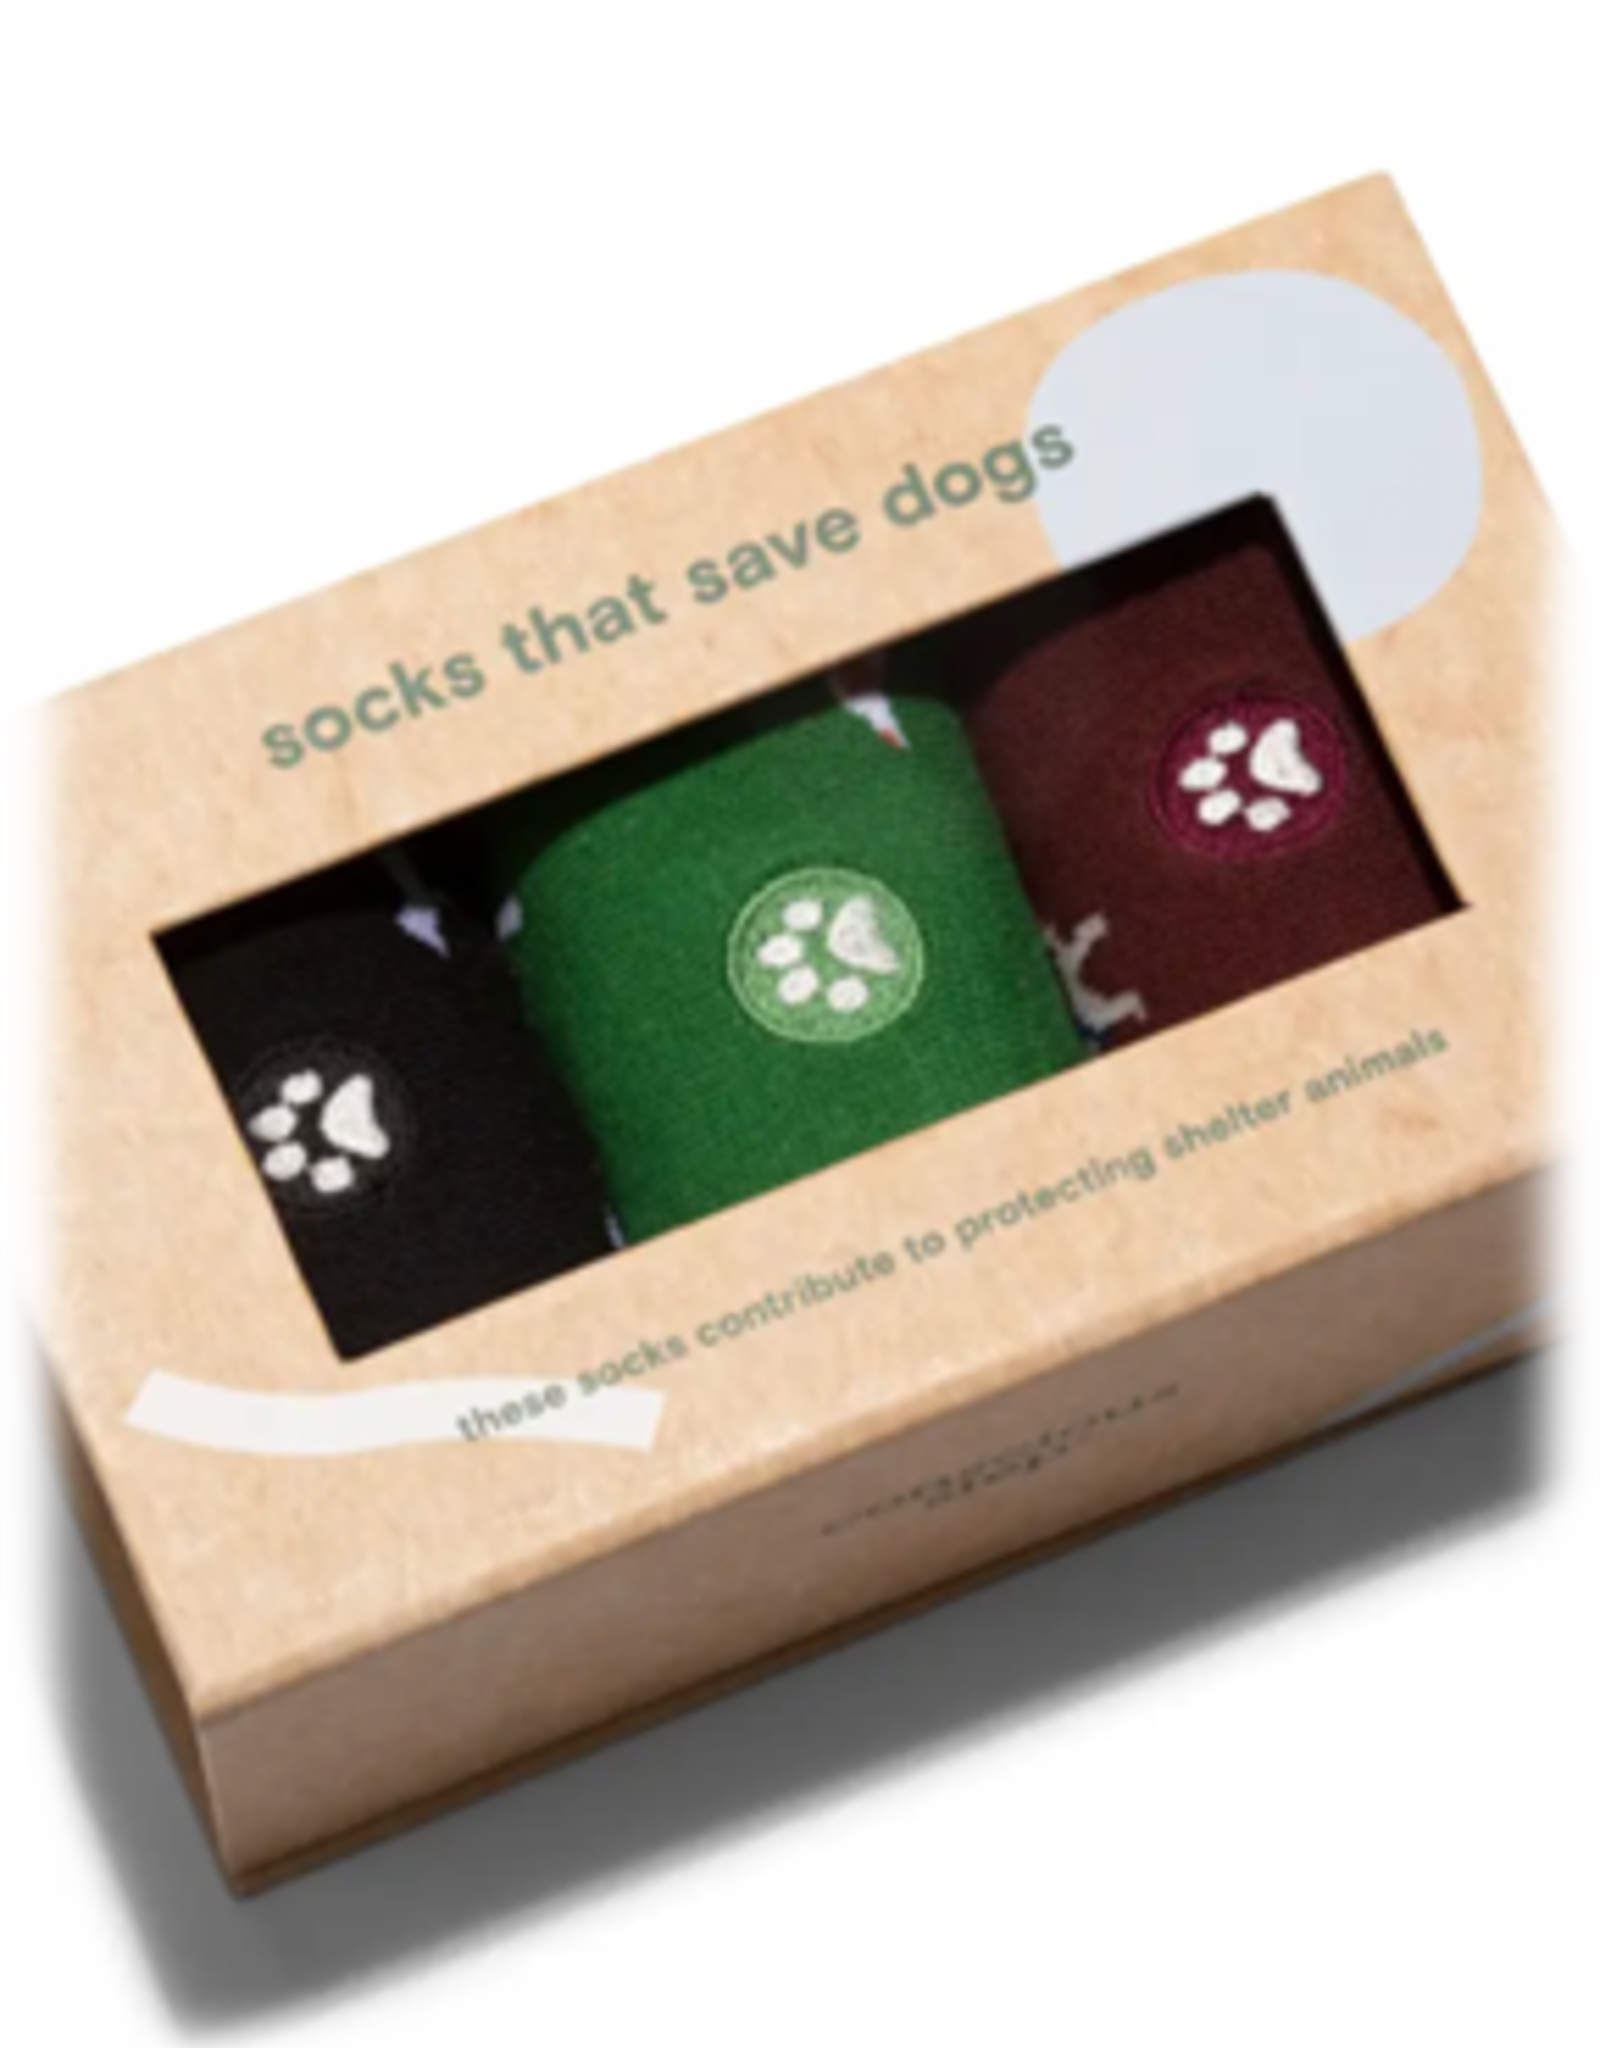 Boxed Set - Socks that Save Dogs Small